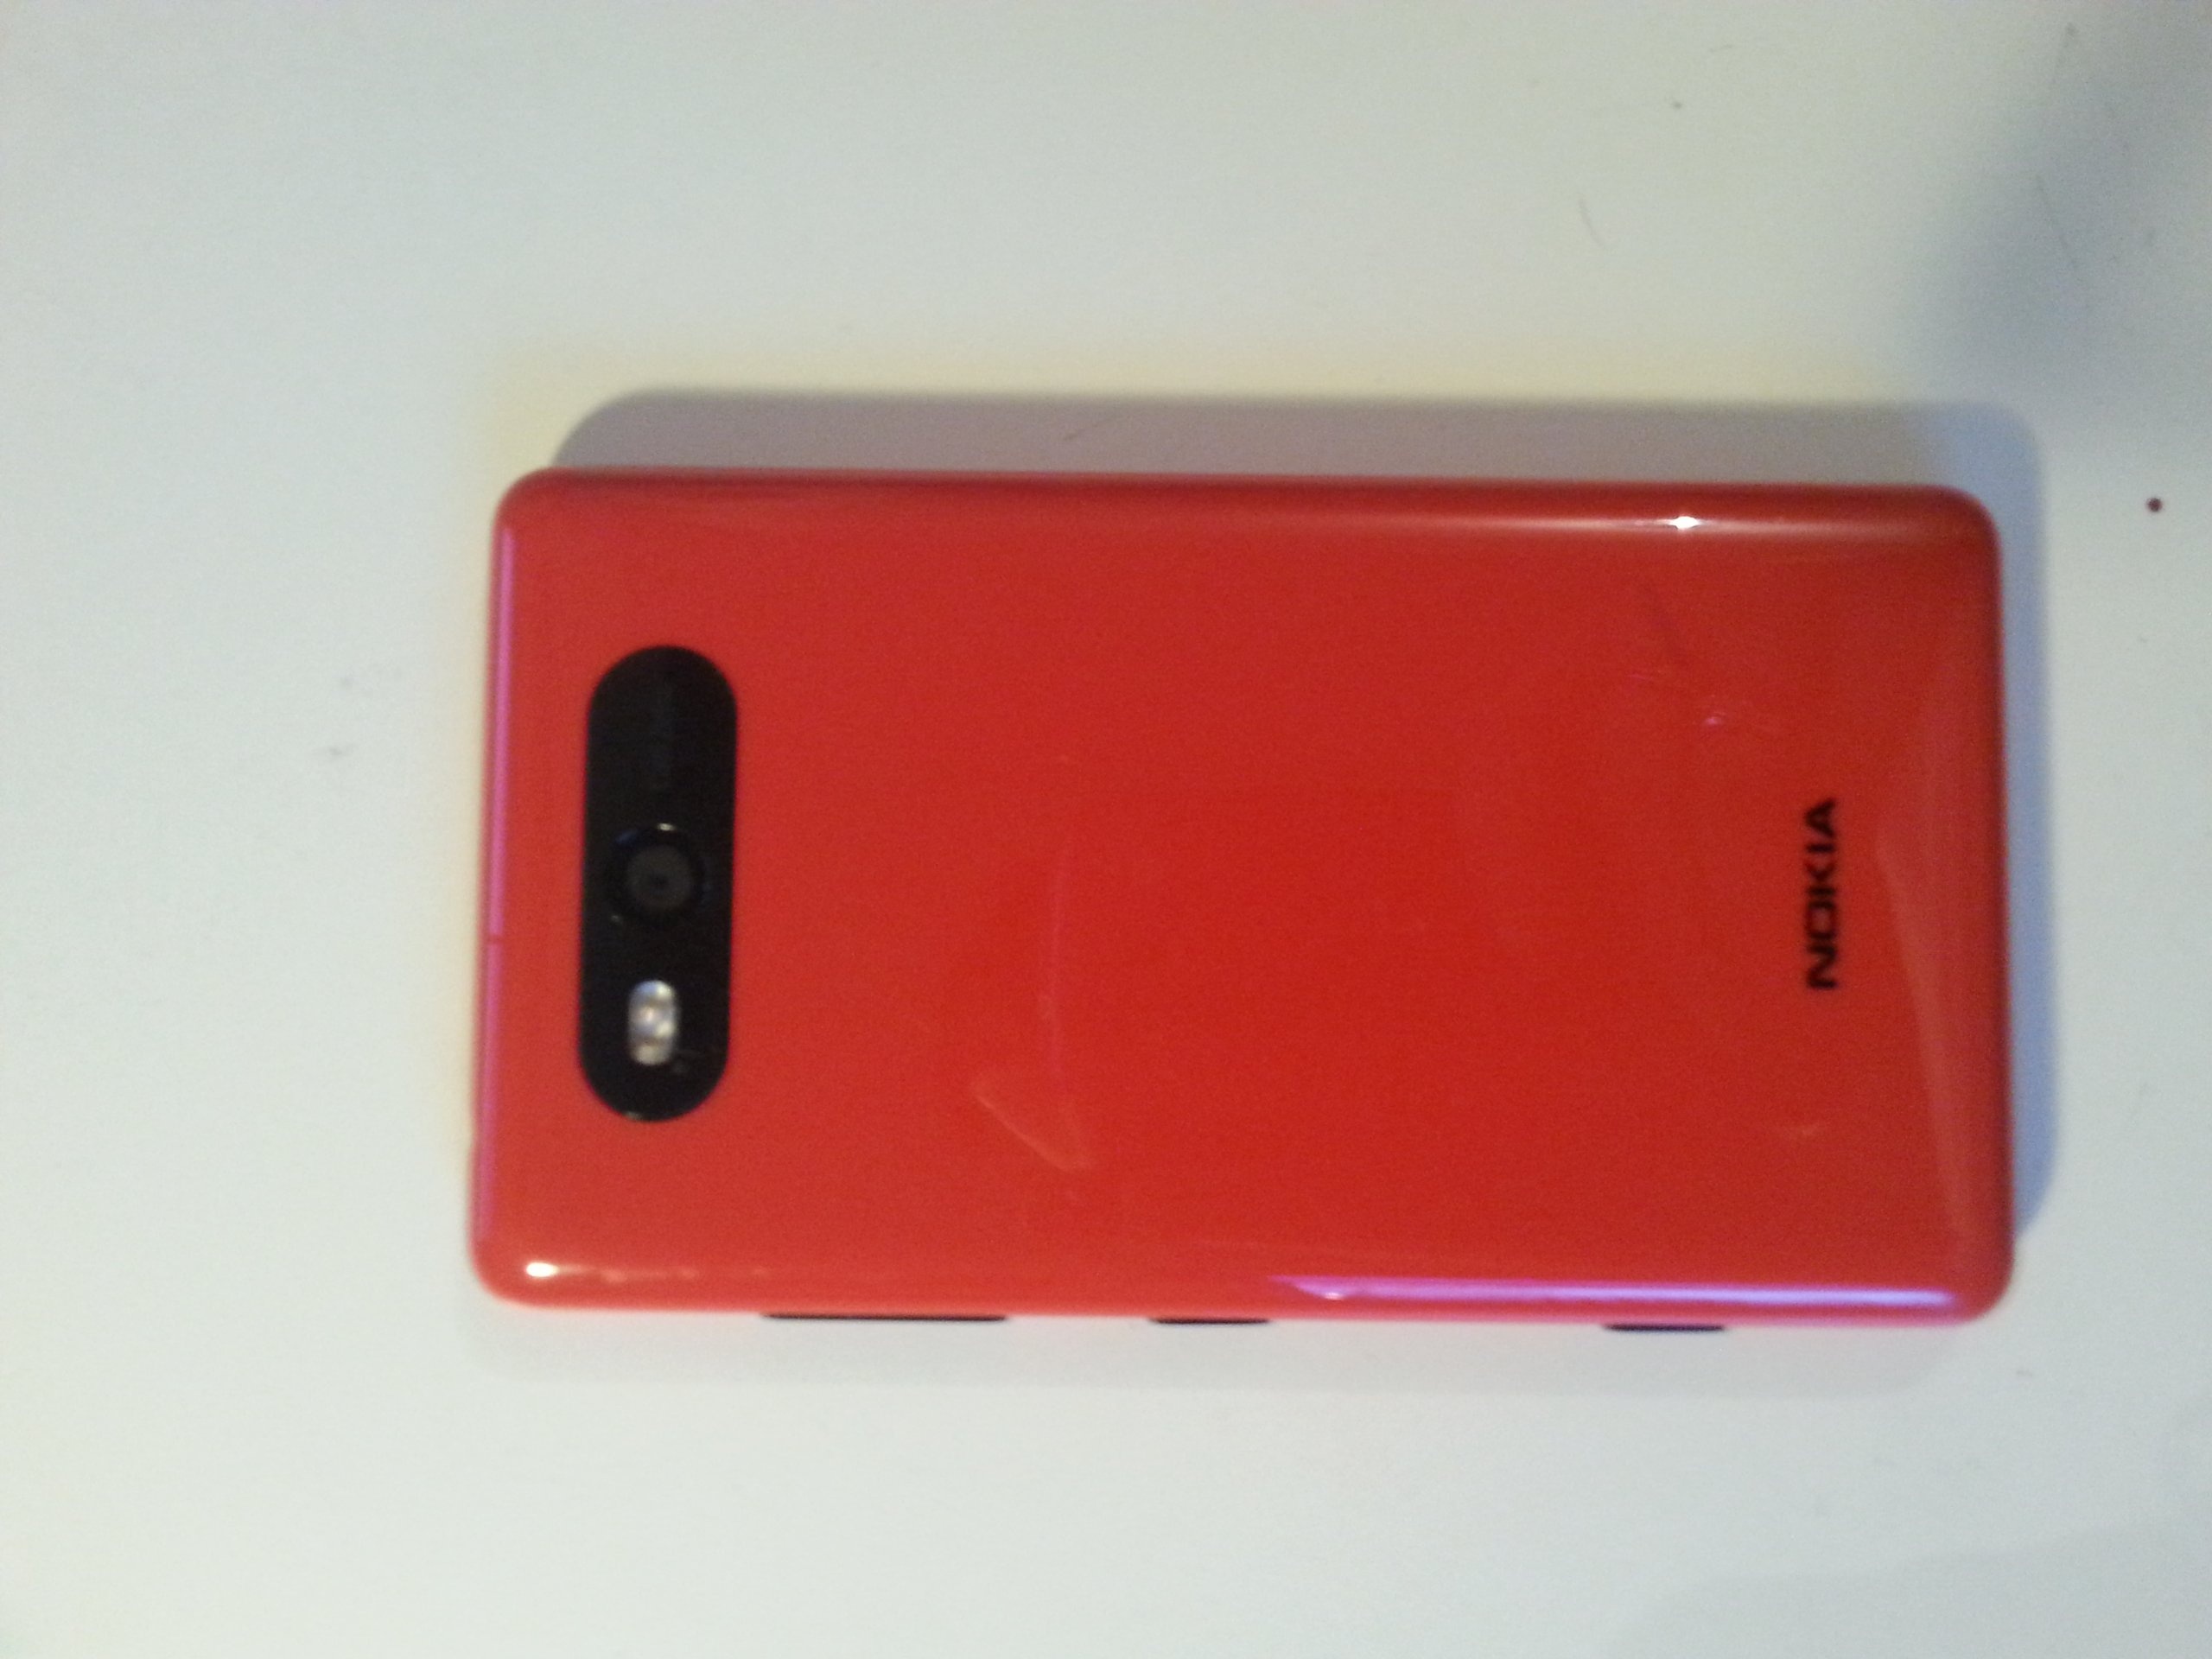 Nokia Lumia 820 Smartphone (10,9 cm (4,3 Zoll) ClearBlack OLED WVGA Touchscreen, 8 Megapixel Kamera, 1,5 GHz Dual-Core-Prozessor, NFC, LTE-fähig, Windows Phone 8) gloss red